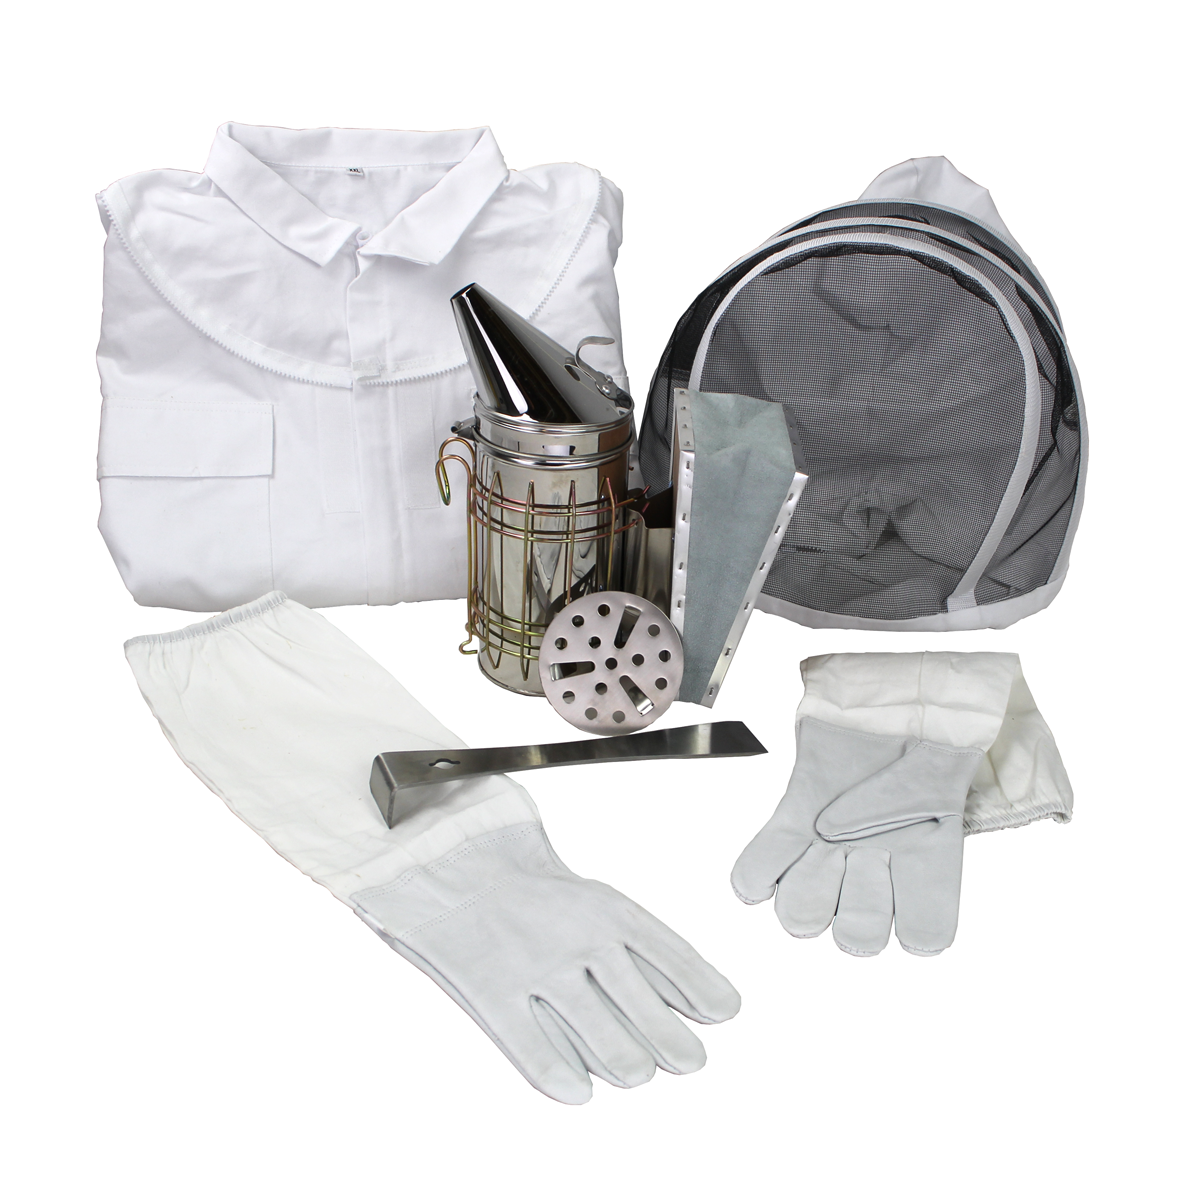 Accessories Package That Include Detachable Veil, Sting Resistant Suit, Leather Gloves, Curled Hive Tool, Oval Bee Escape, and Smoker